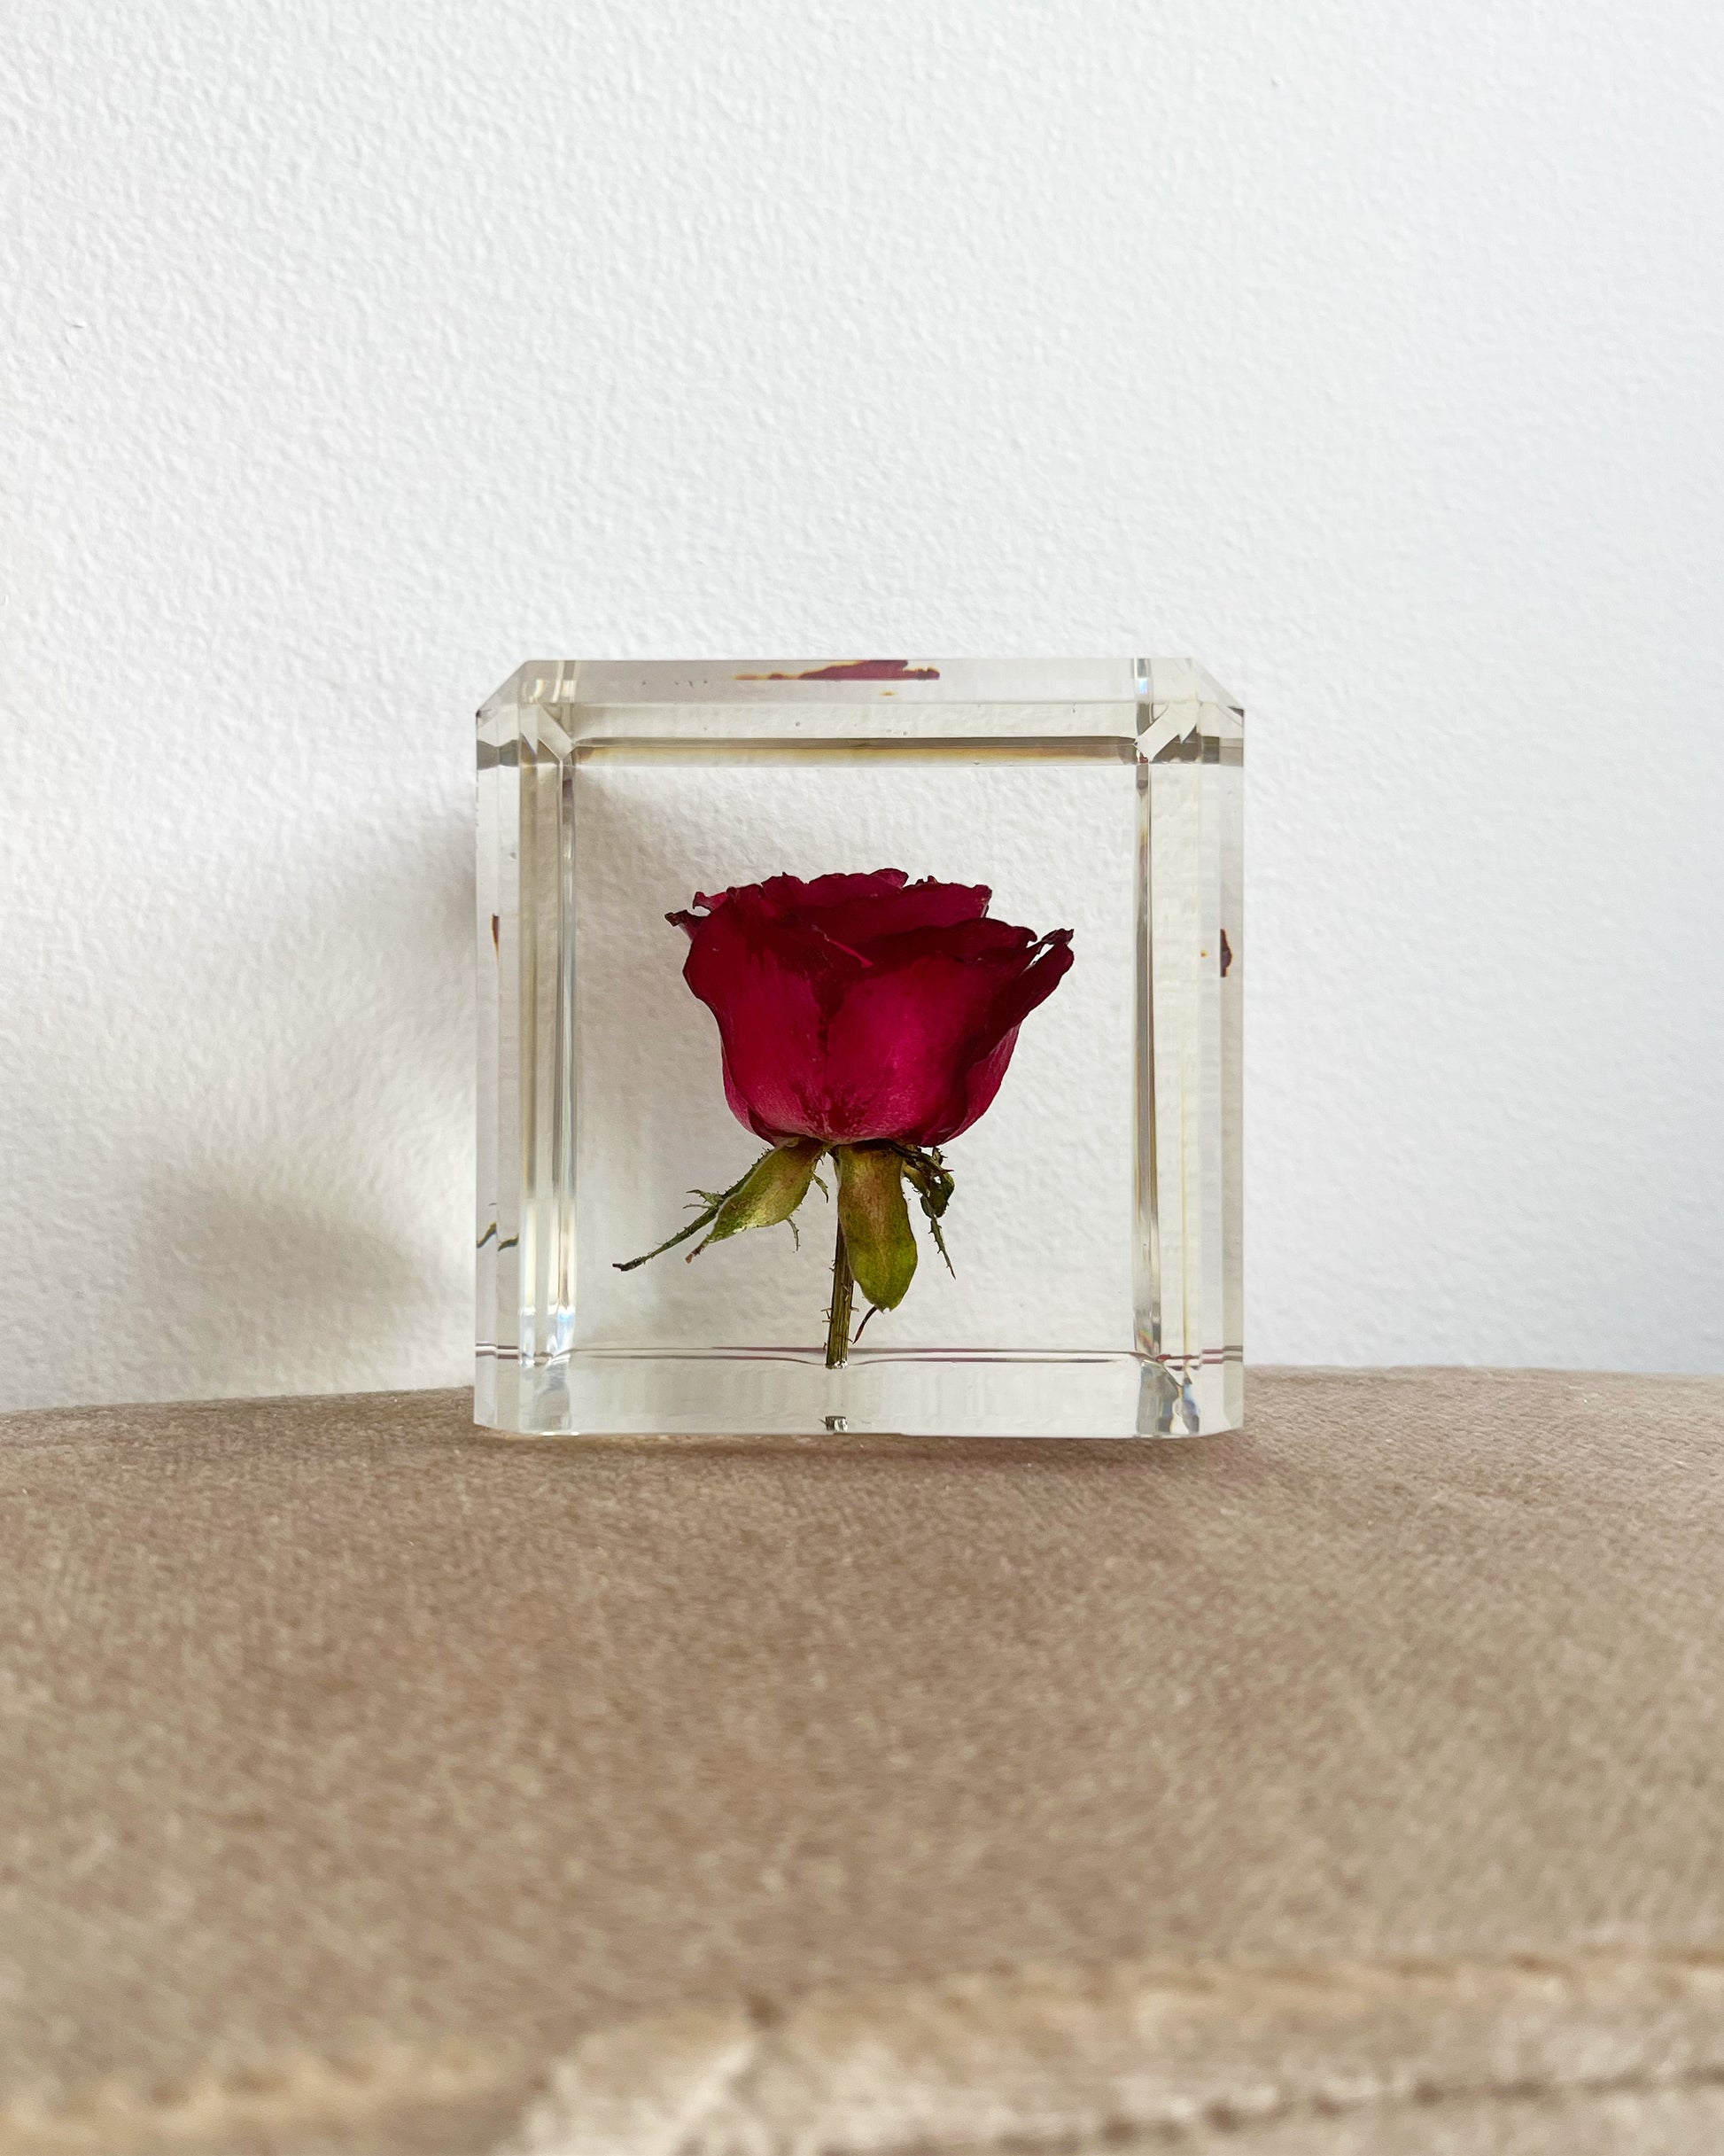 A real red rose flower suspended in a resin "ice cube." with green stem and thorns